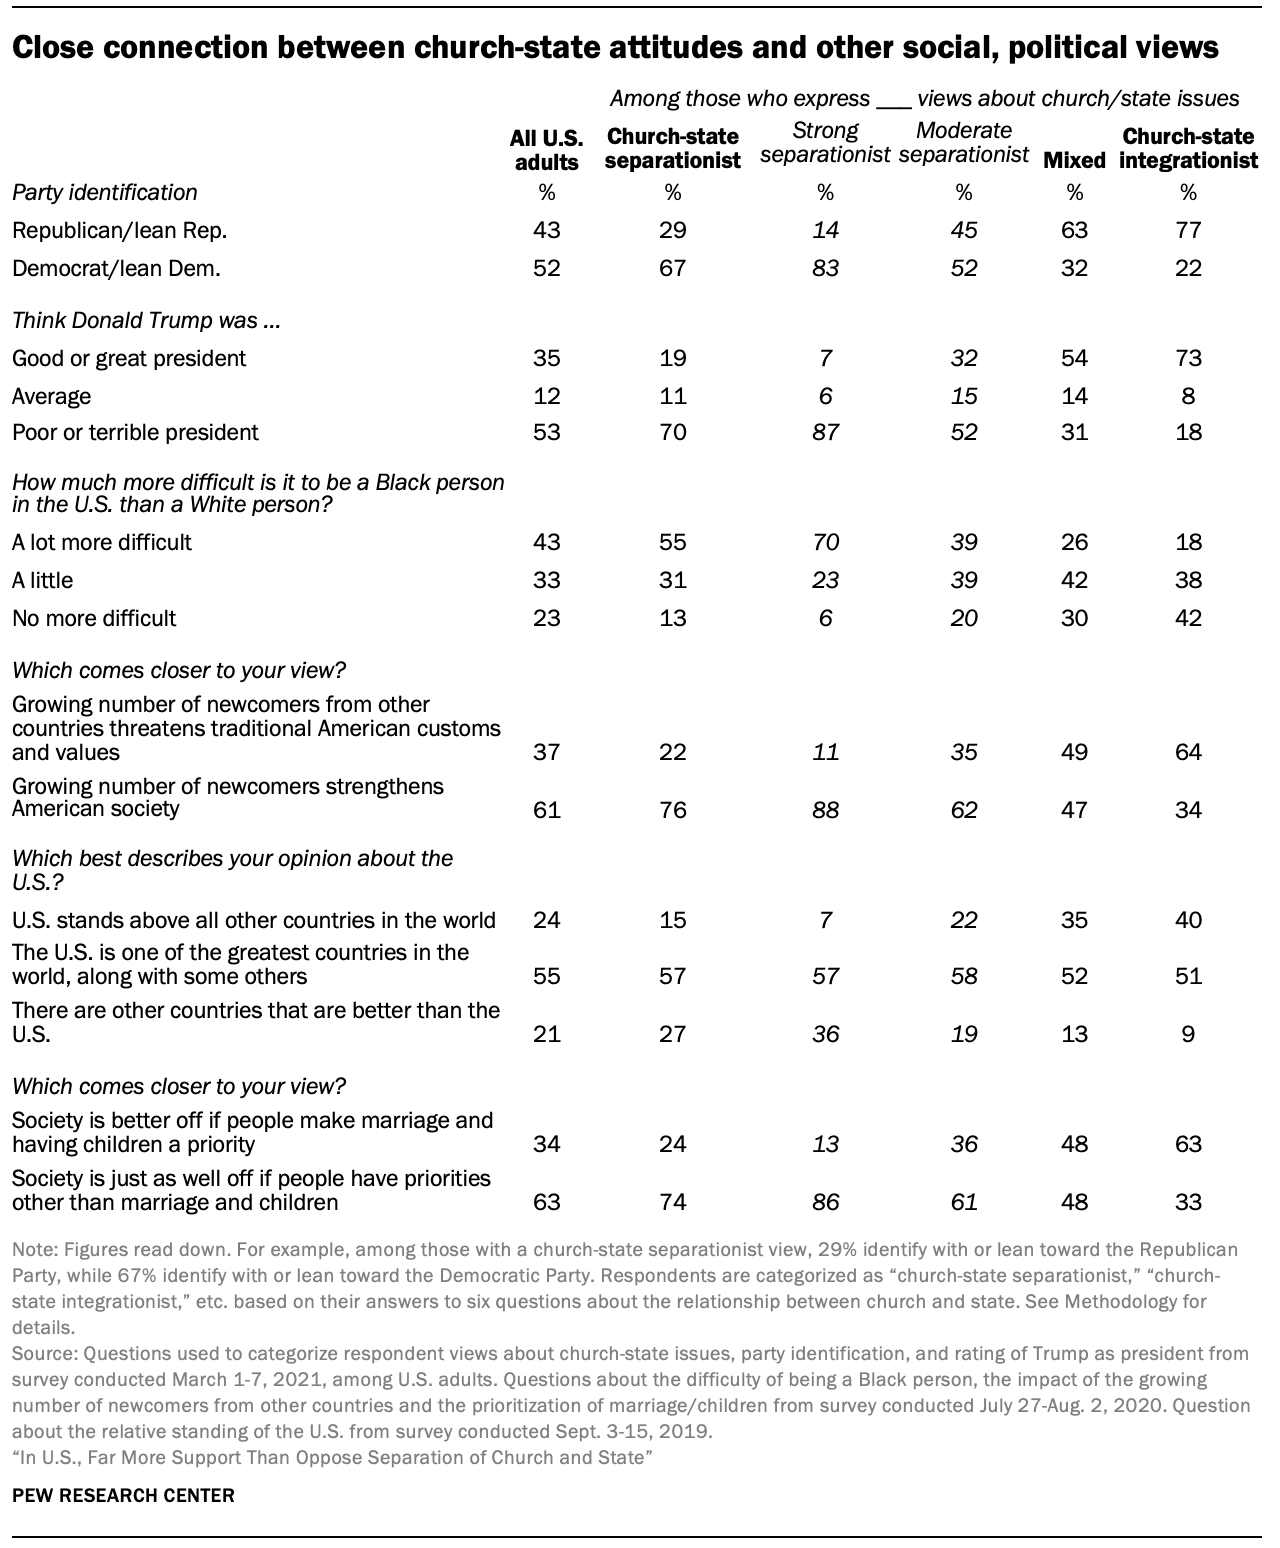 Close connection between church-state attitudes and other social, political views